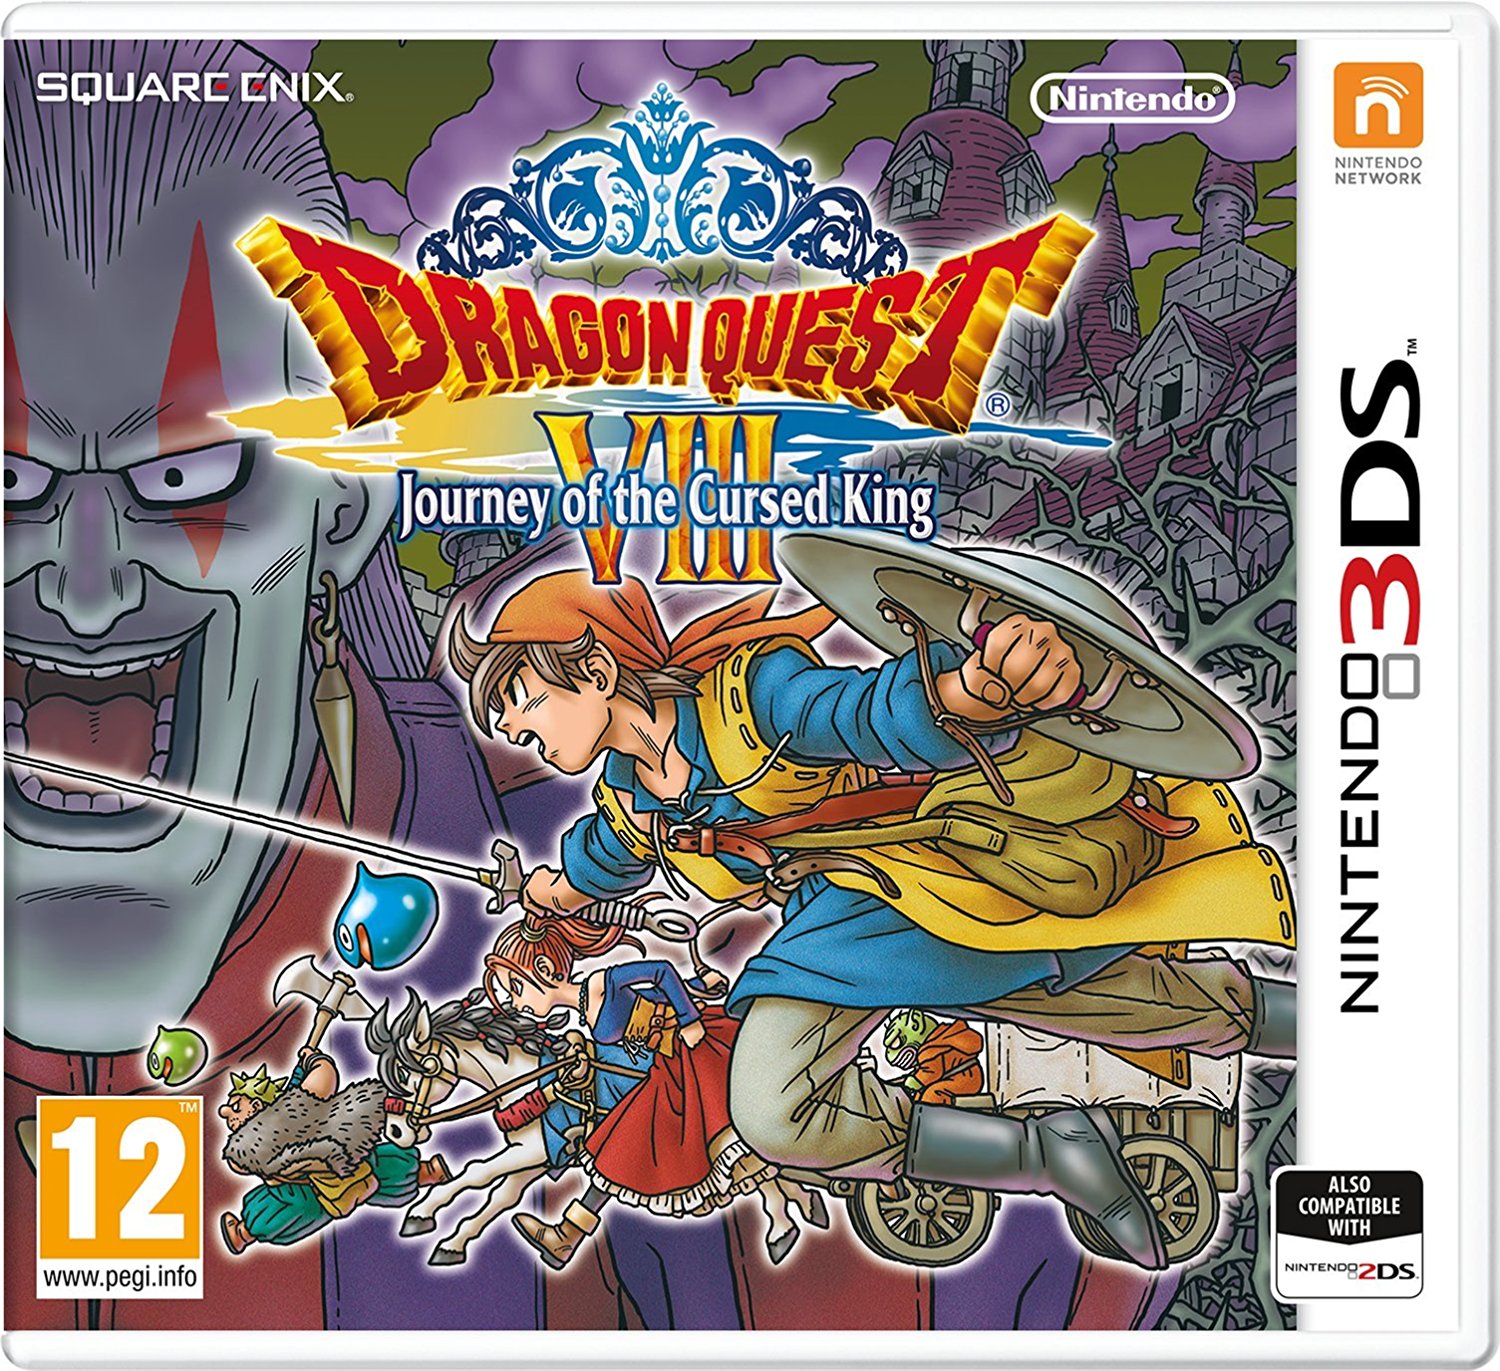 Review | Dragon Quest VIII: Journey of the Cursed King